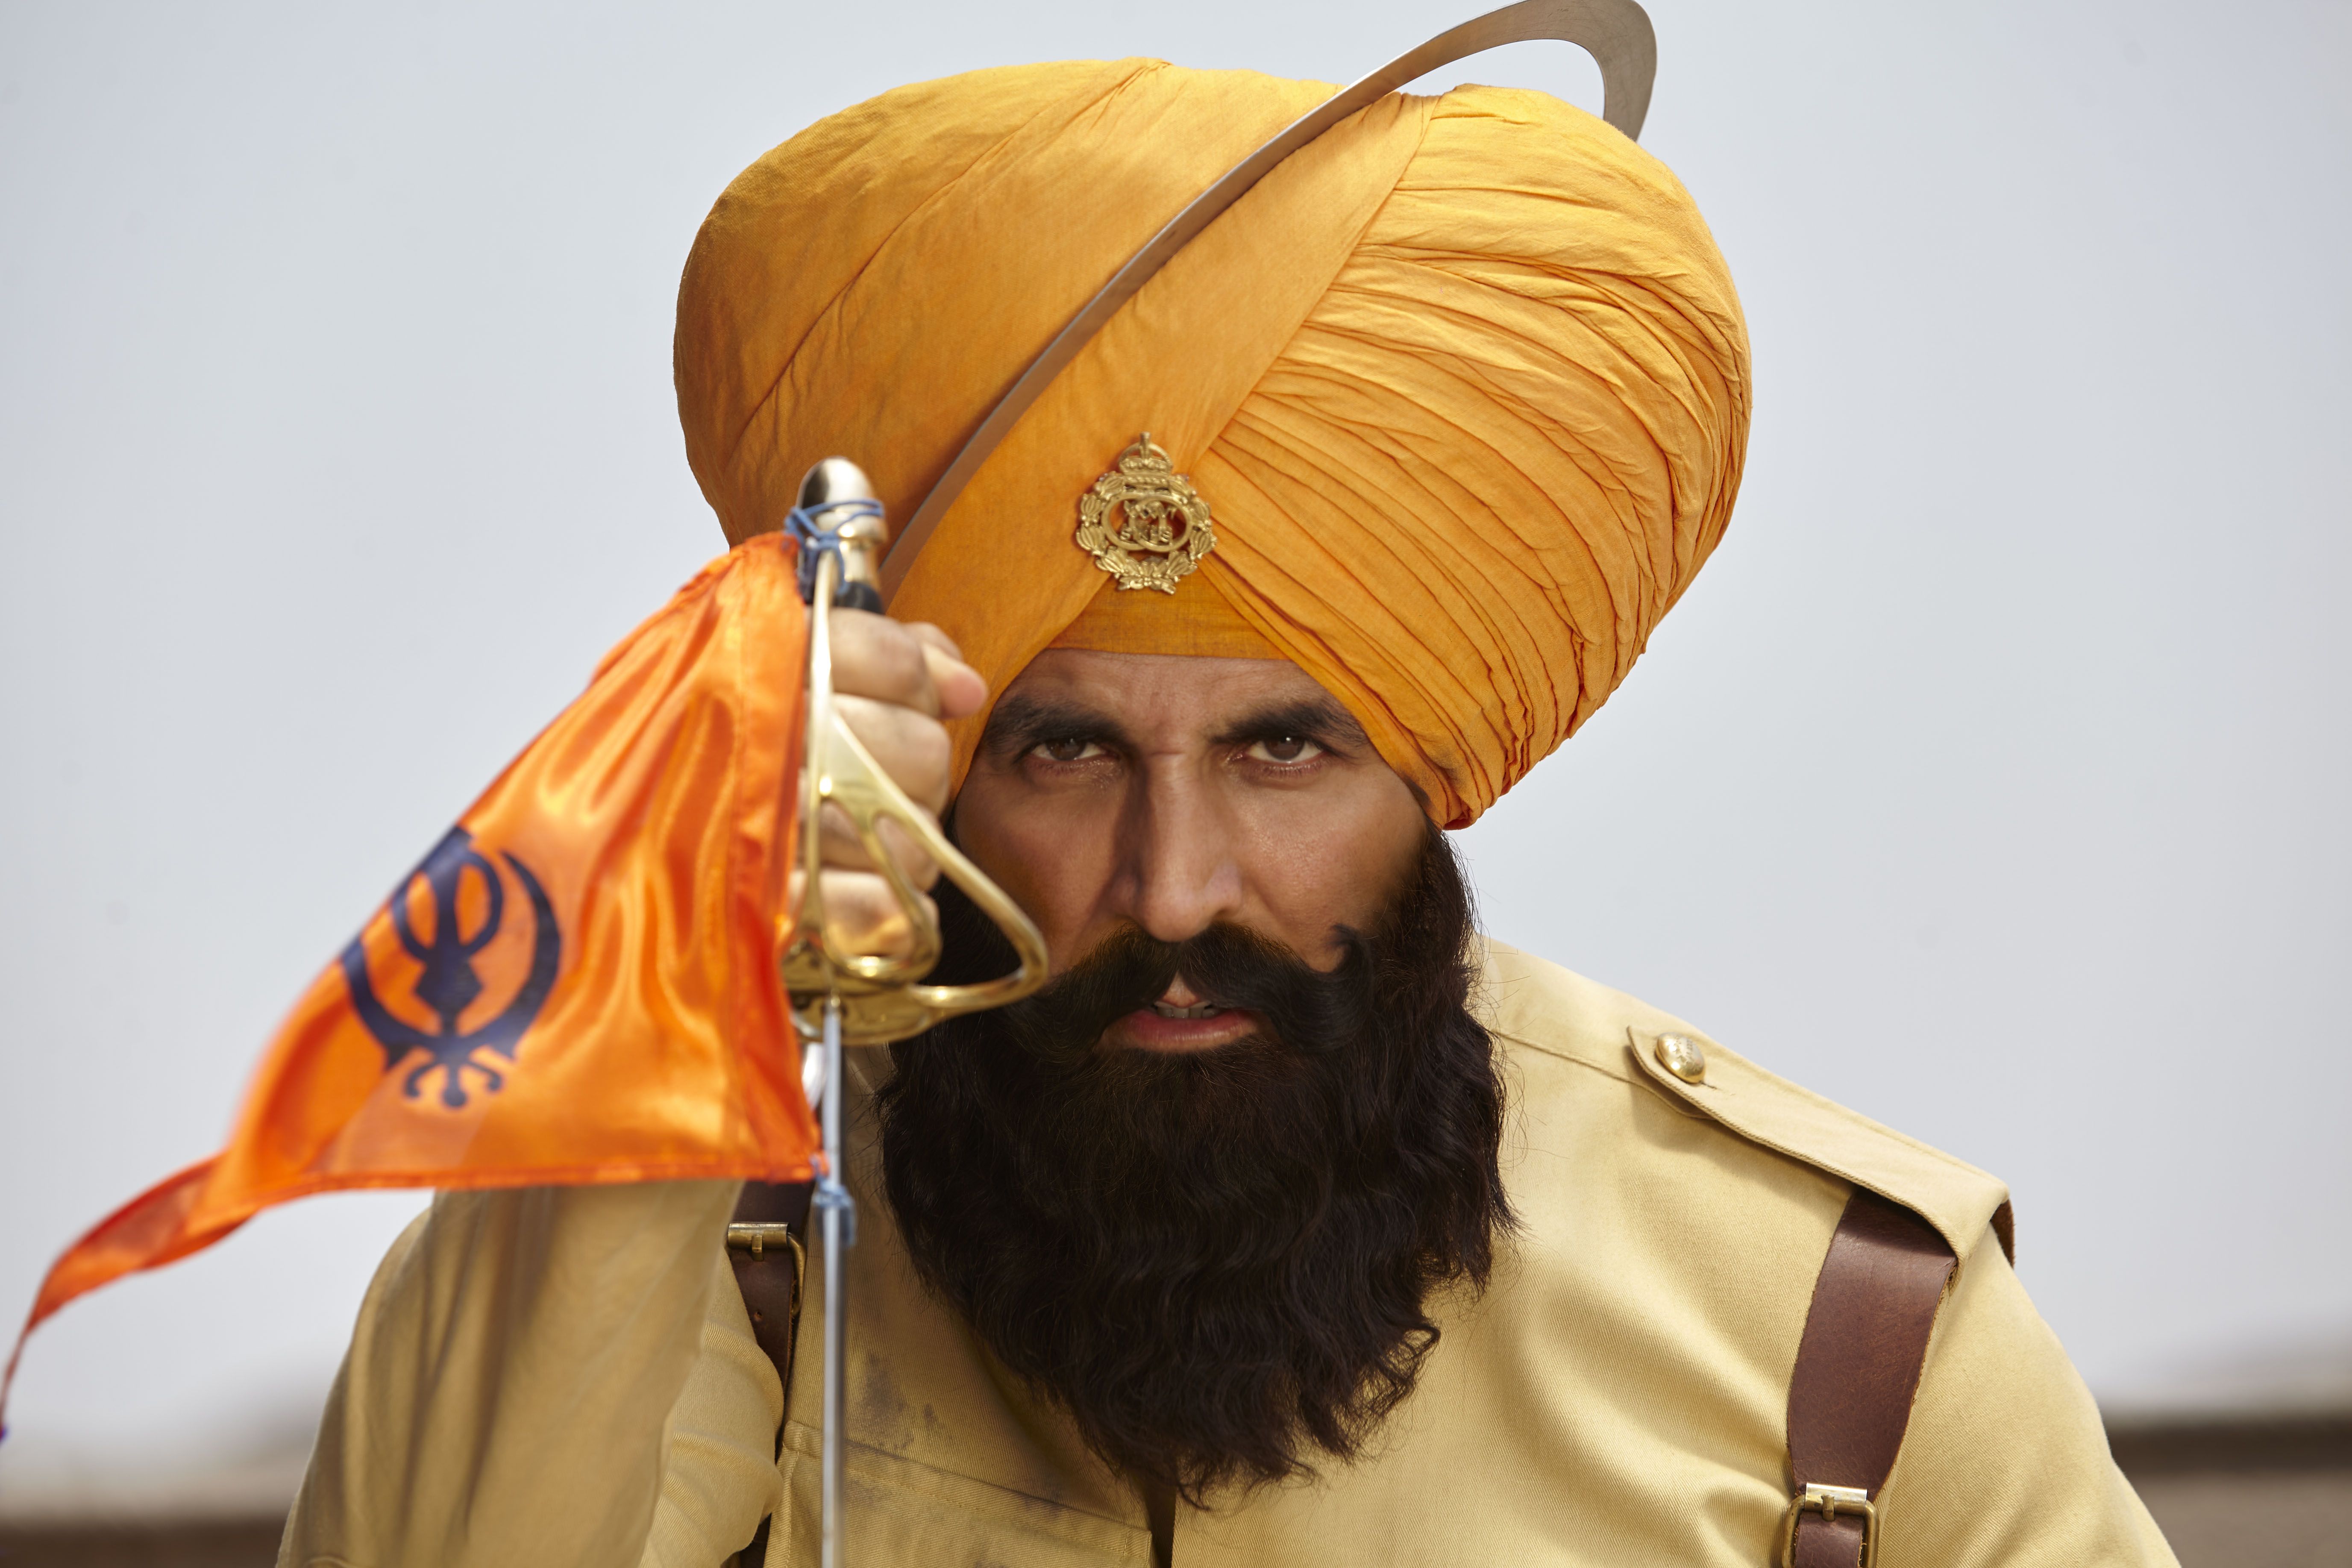 In Pics: Stunning scenes of Akshay Kumar and more from the sets of 'Kesari' To India